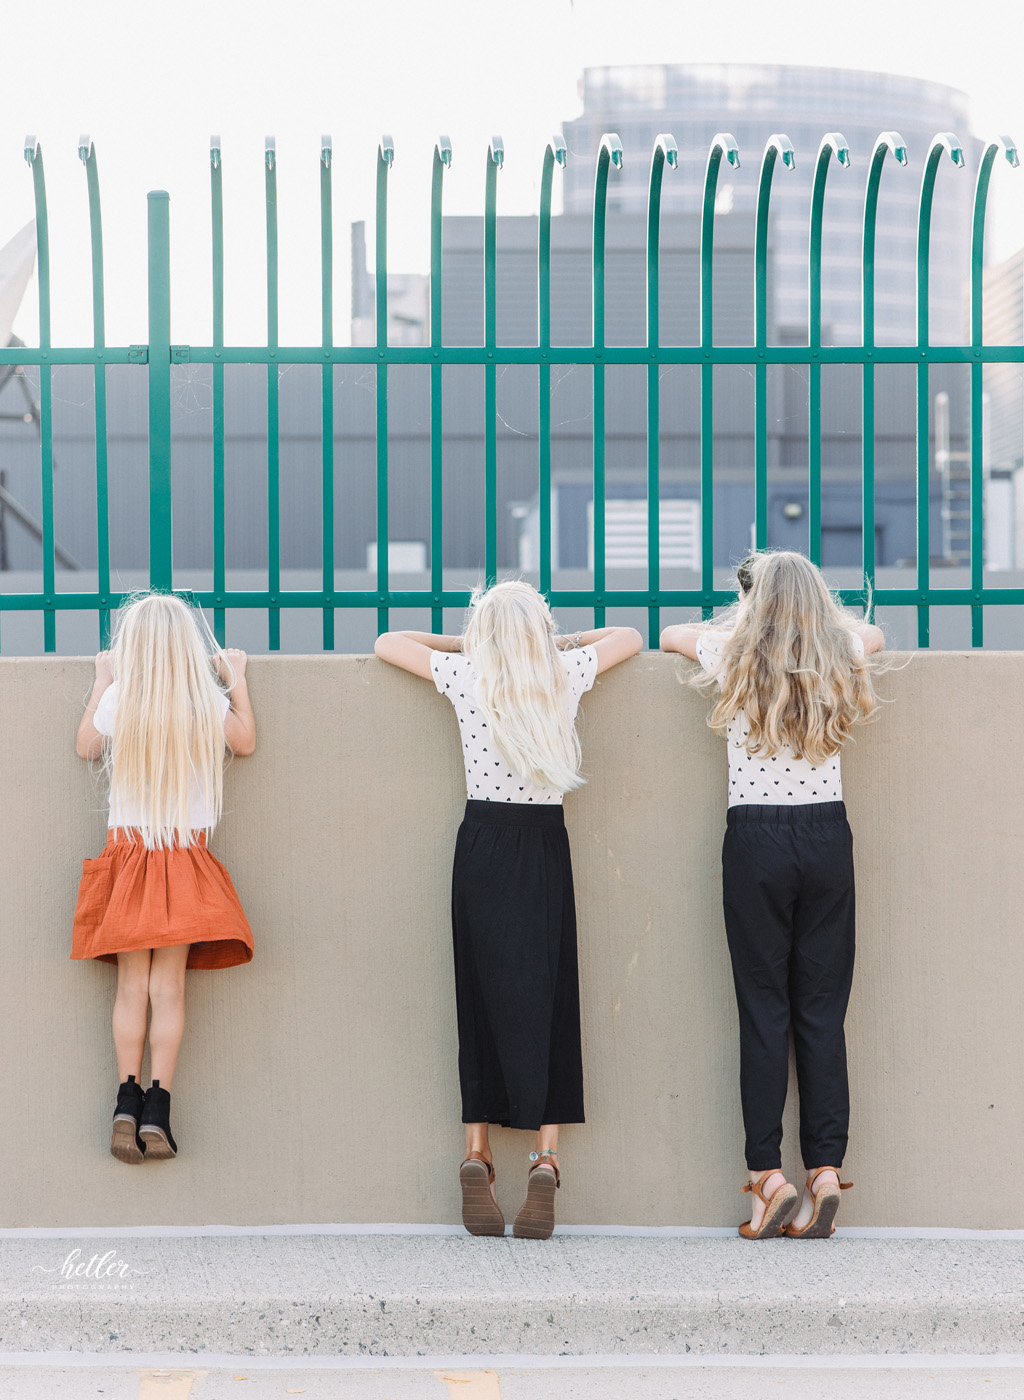 Downtown Grand Rapids family session on a parking garage rooftop